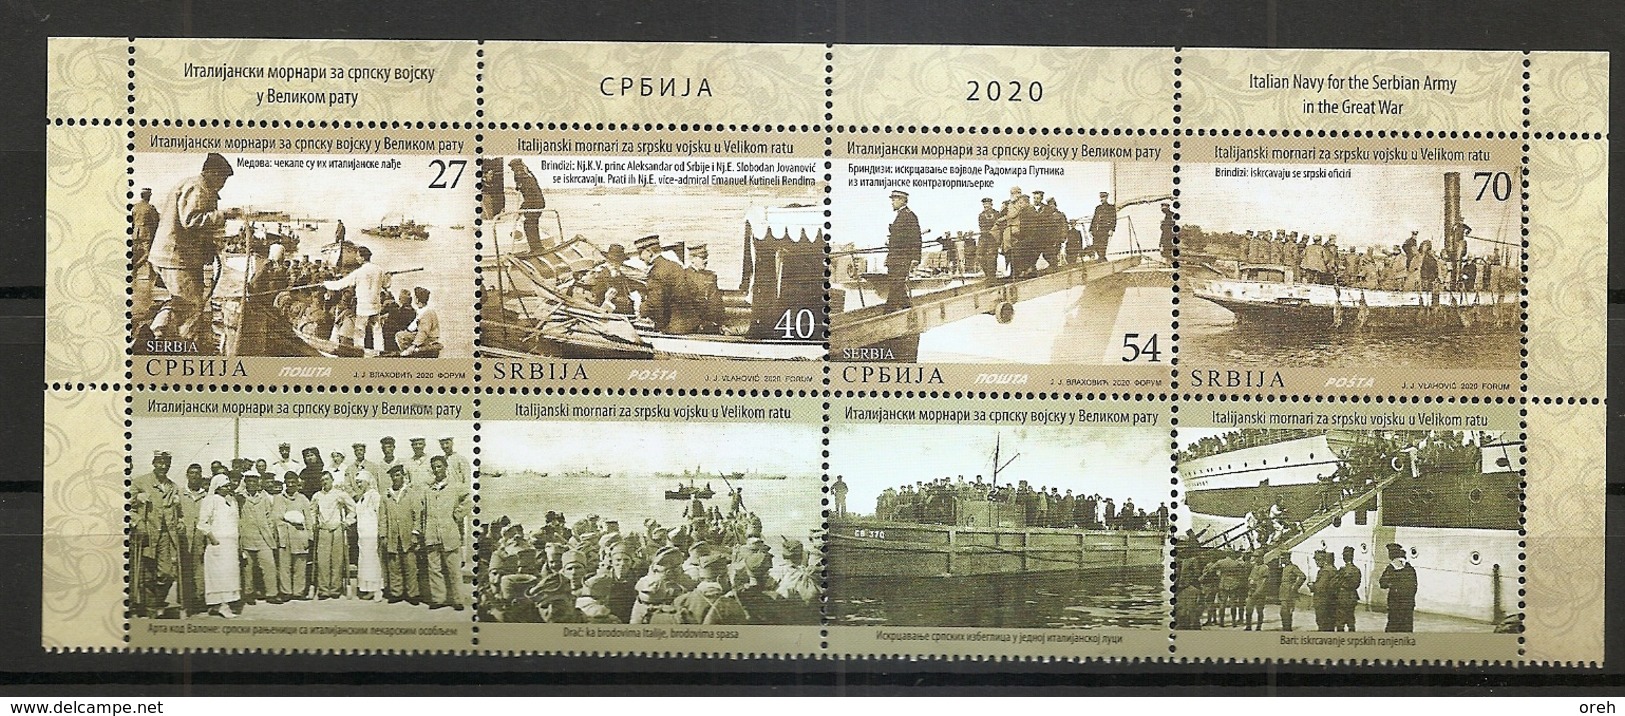 SERBIA 2020,ITALY NAVY FOR THE SERBIAN ARMY IN THE GREAT WAR, HISTORY, WW1,  SHIPS,VIGNETTE,MNH - Guerre Mondiale (Première)